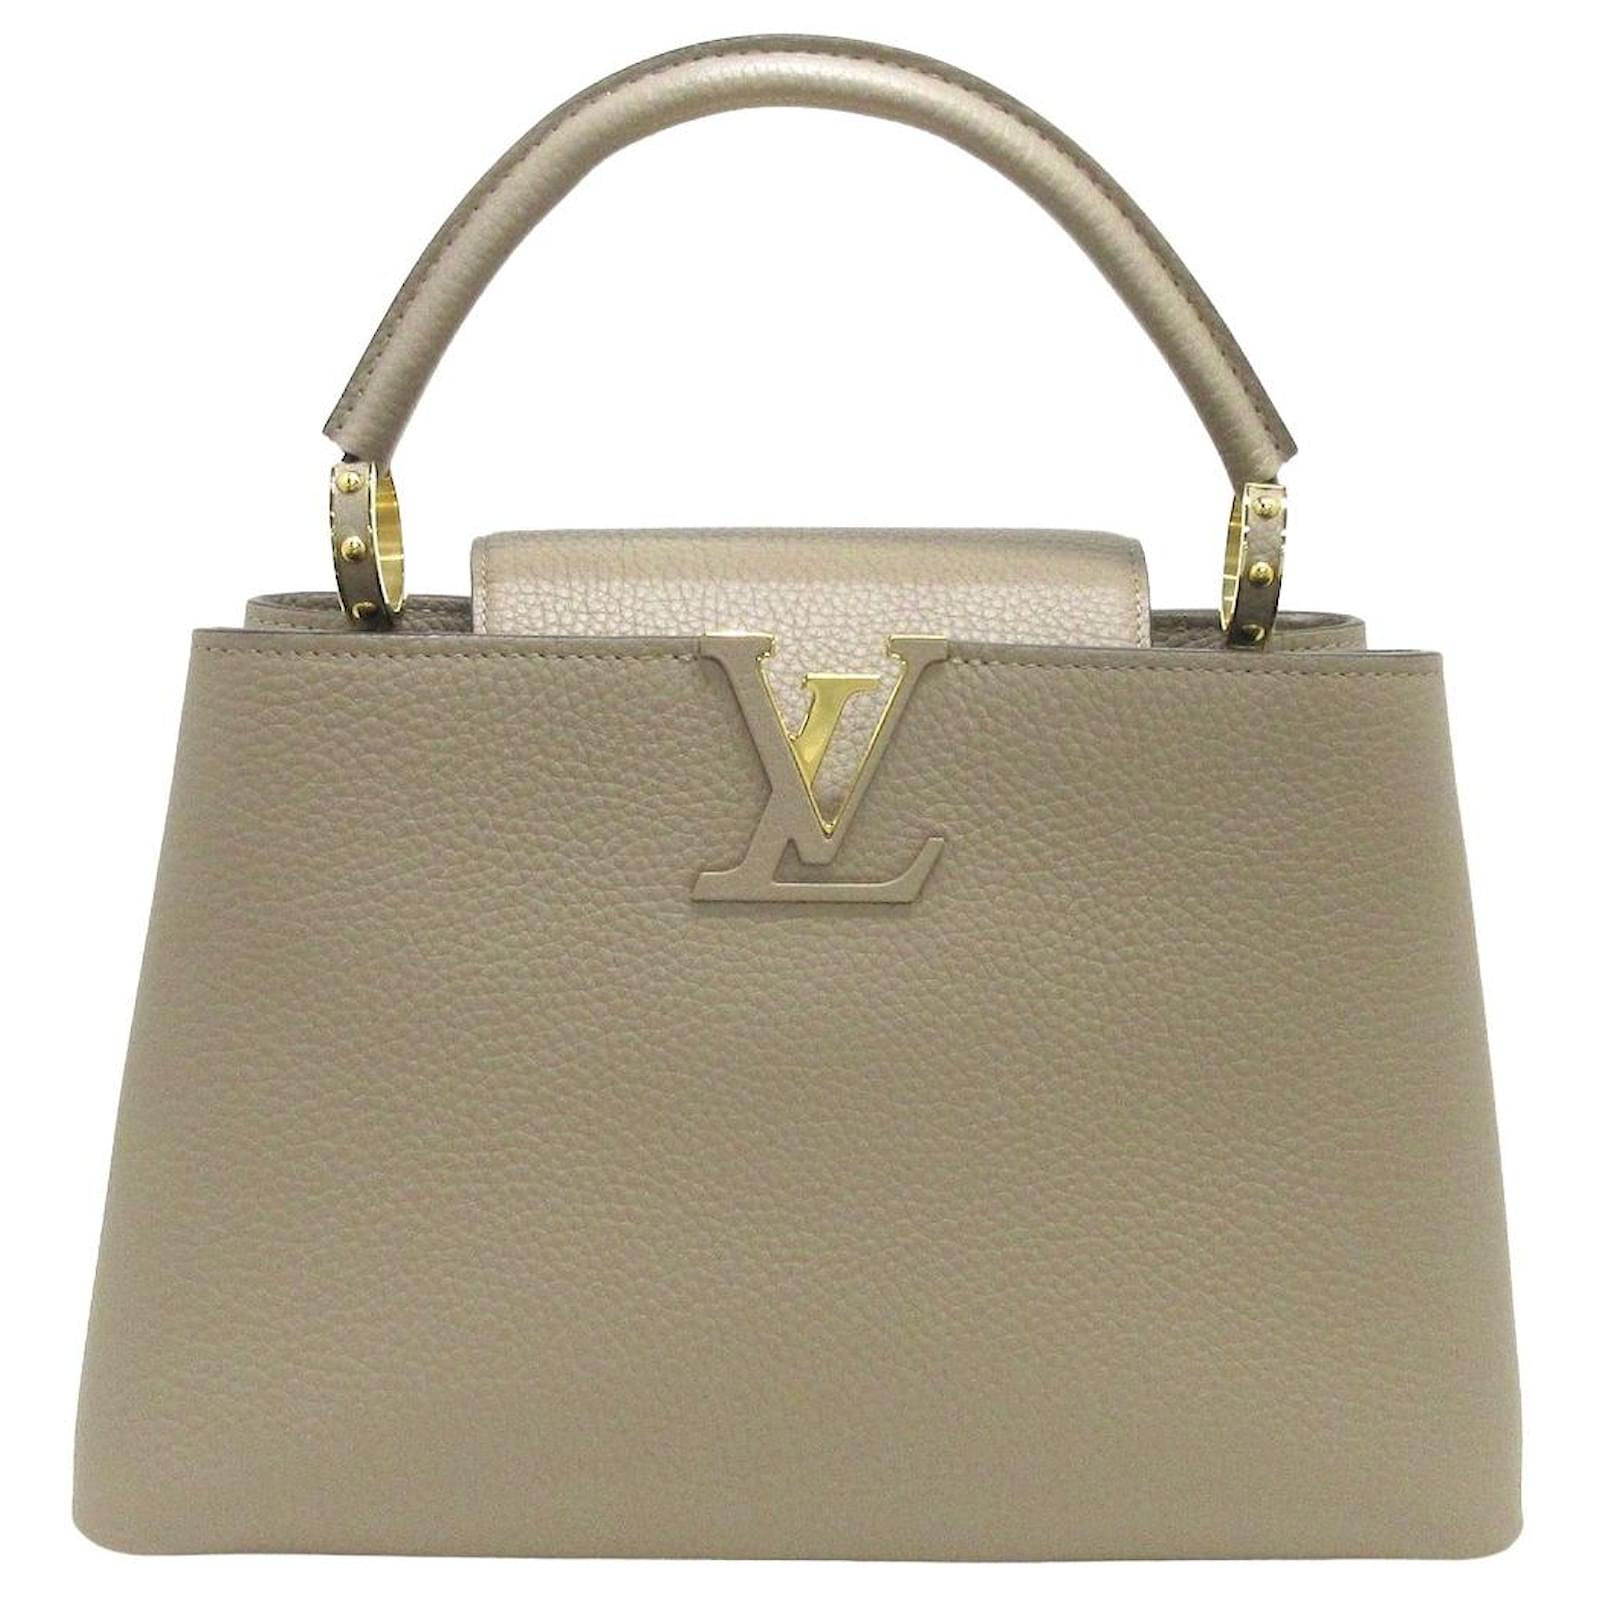 Louis Vuitton's Capucines bag is named after a street. - Still in